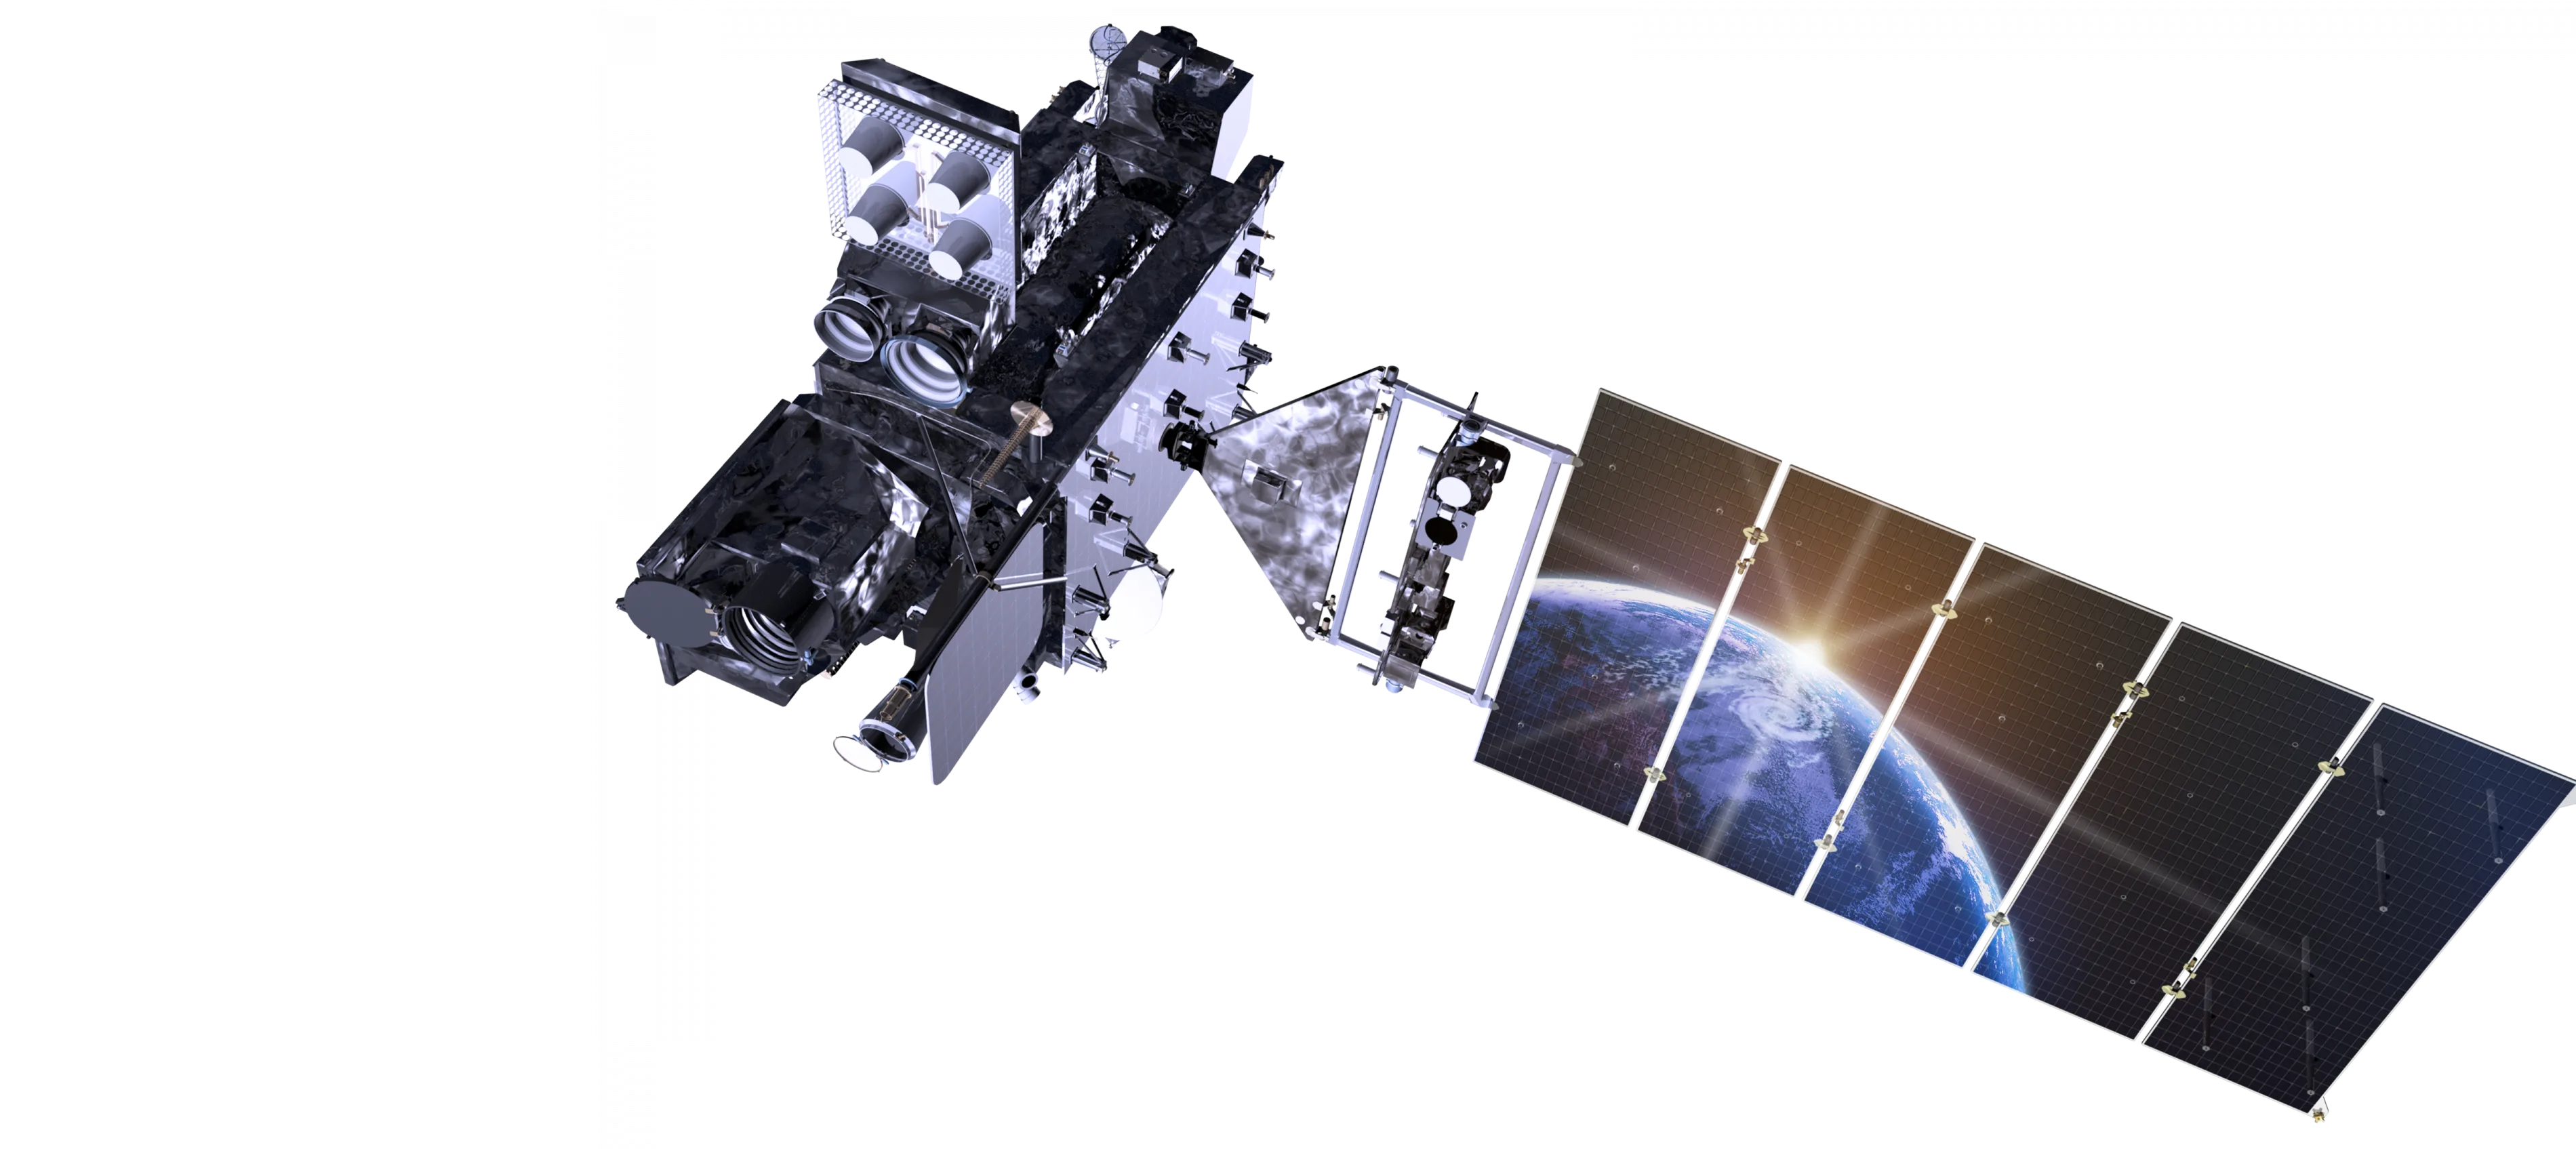 GOES-R series satellite 3d rendering front left side visible with the Earth reflected in it's solar panels.